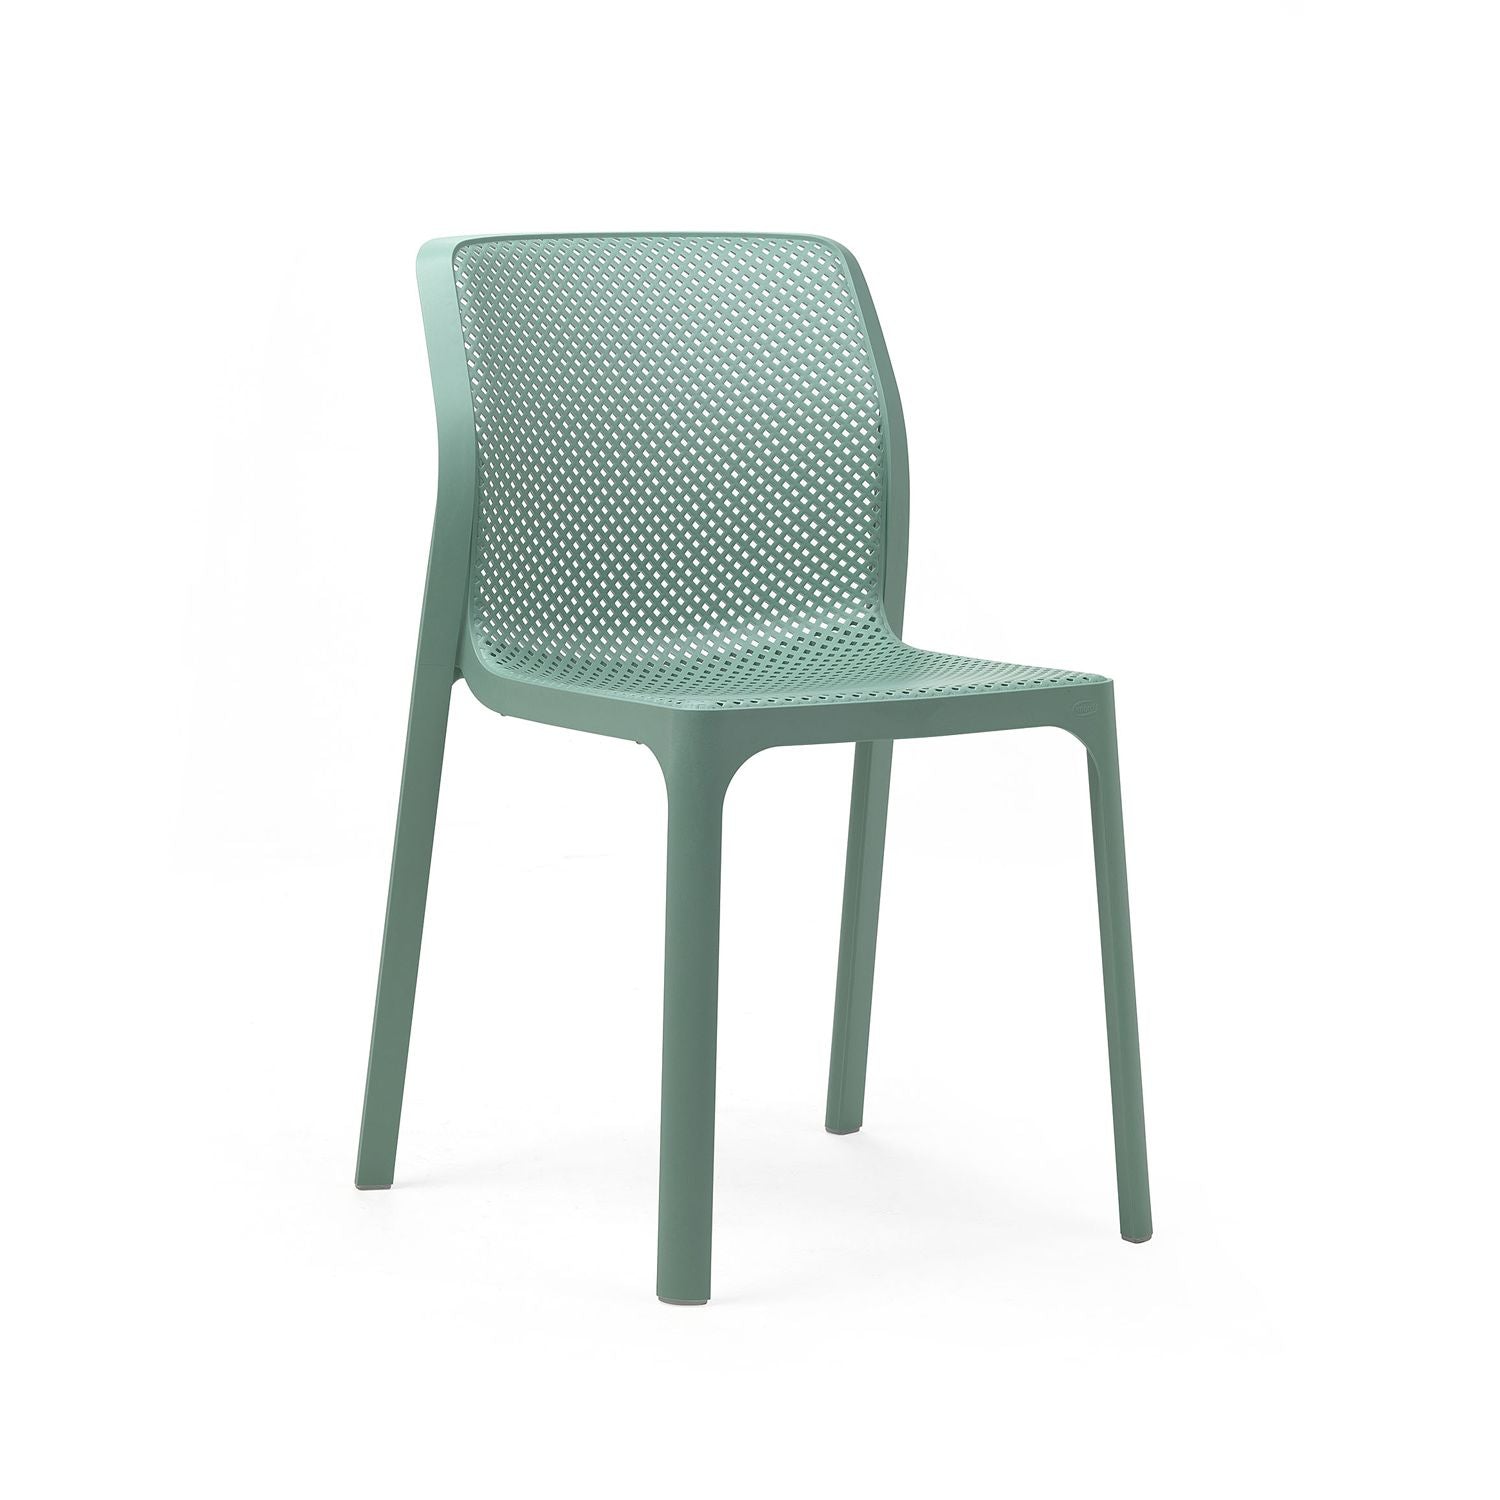 Bit Chair By Nardi - Turquoise